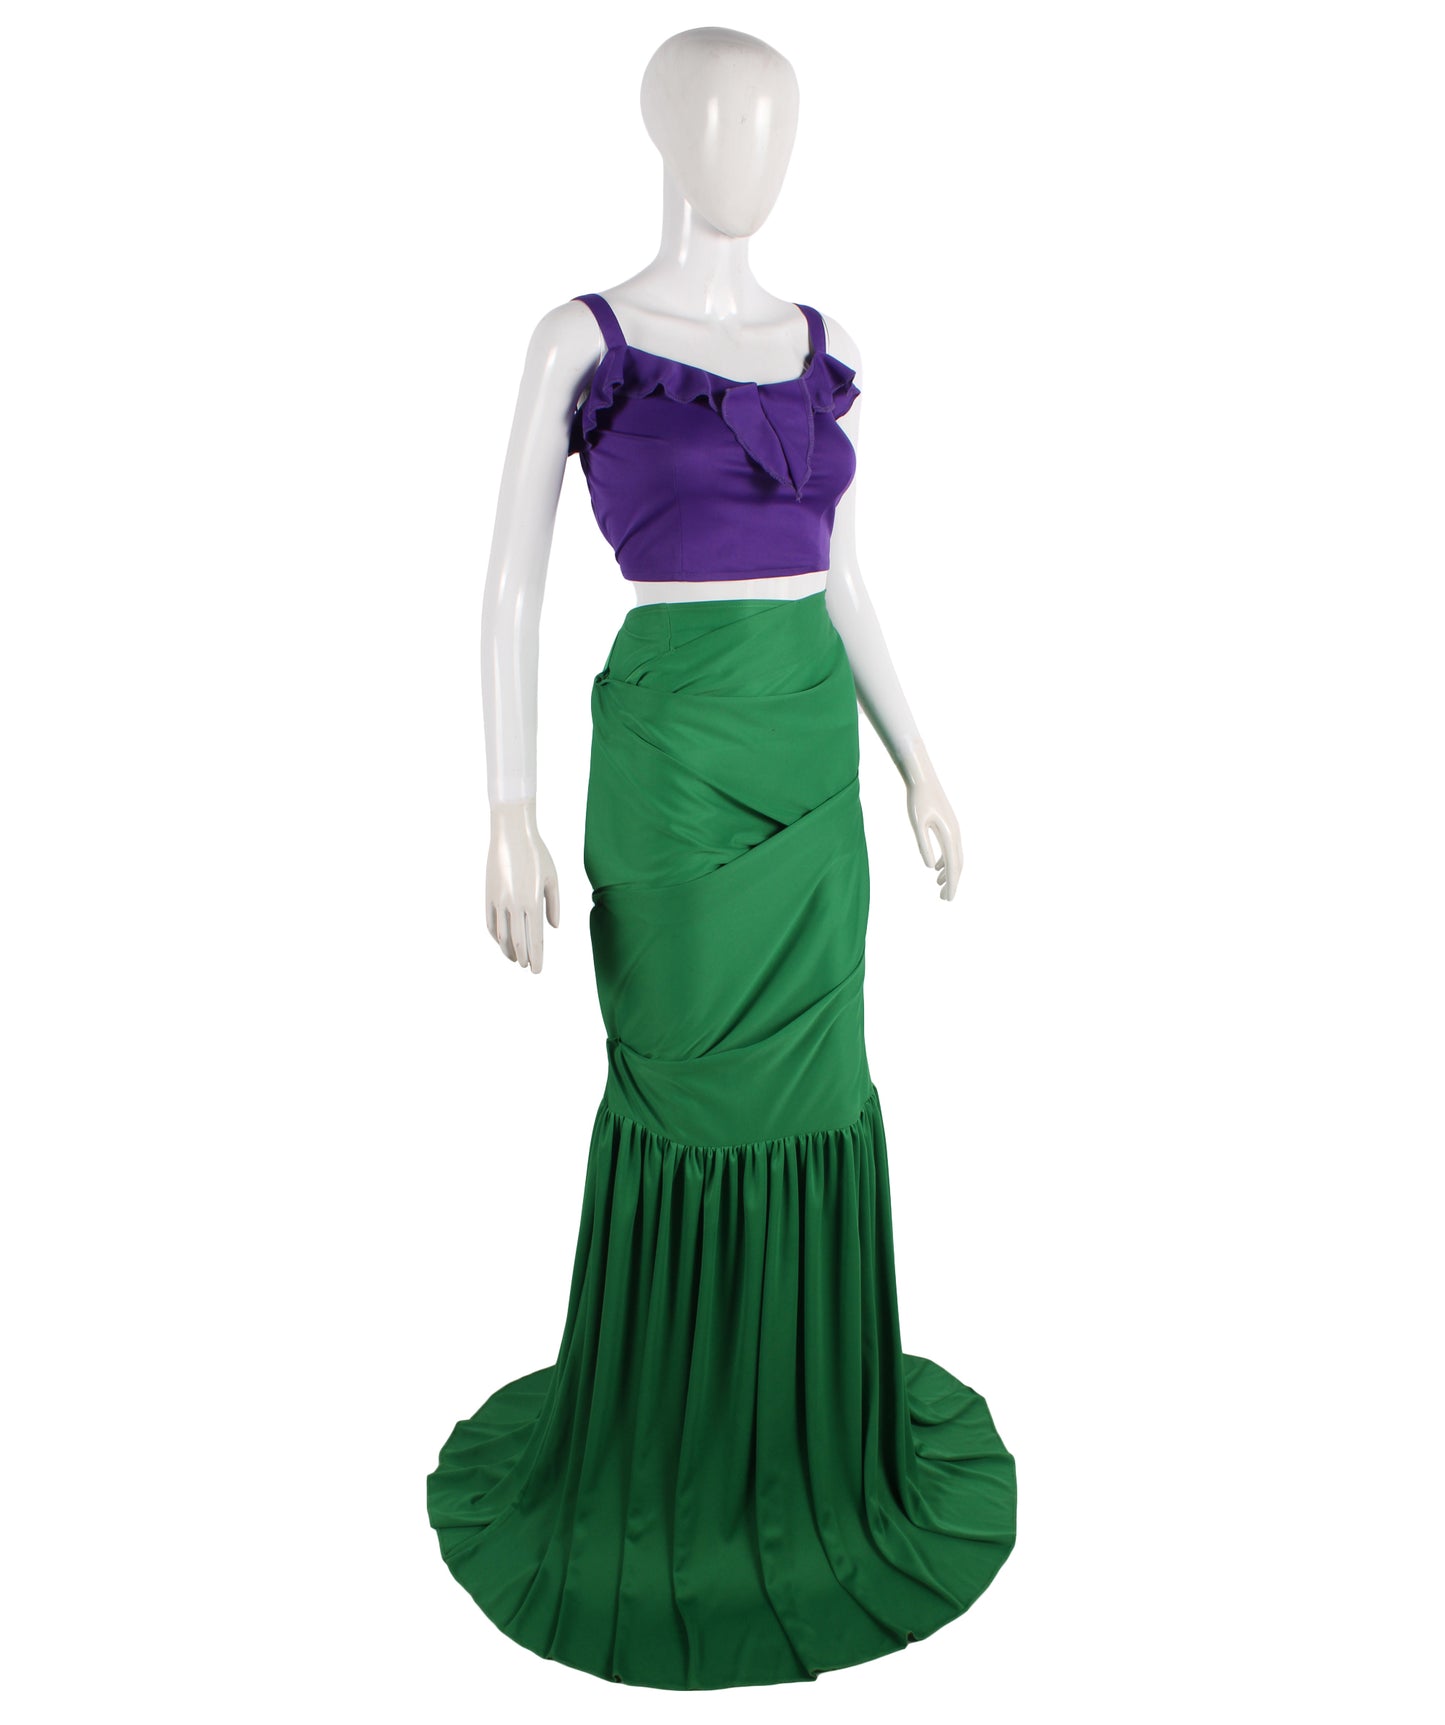 HPO Women's Green Mermaid Costume| Perfect for Halloween| Flame-retardant Synthetic Fabric